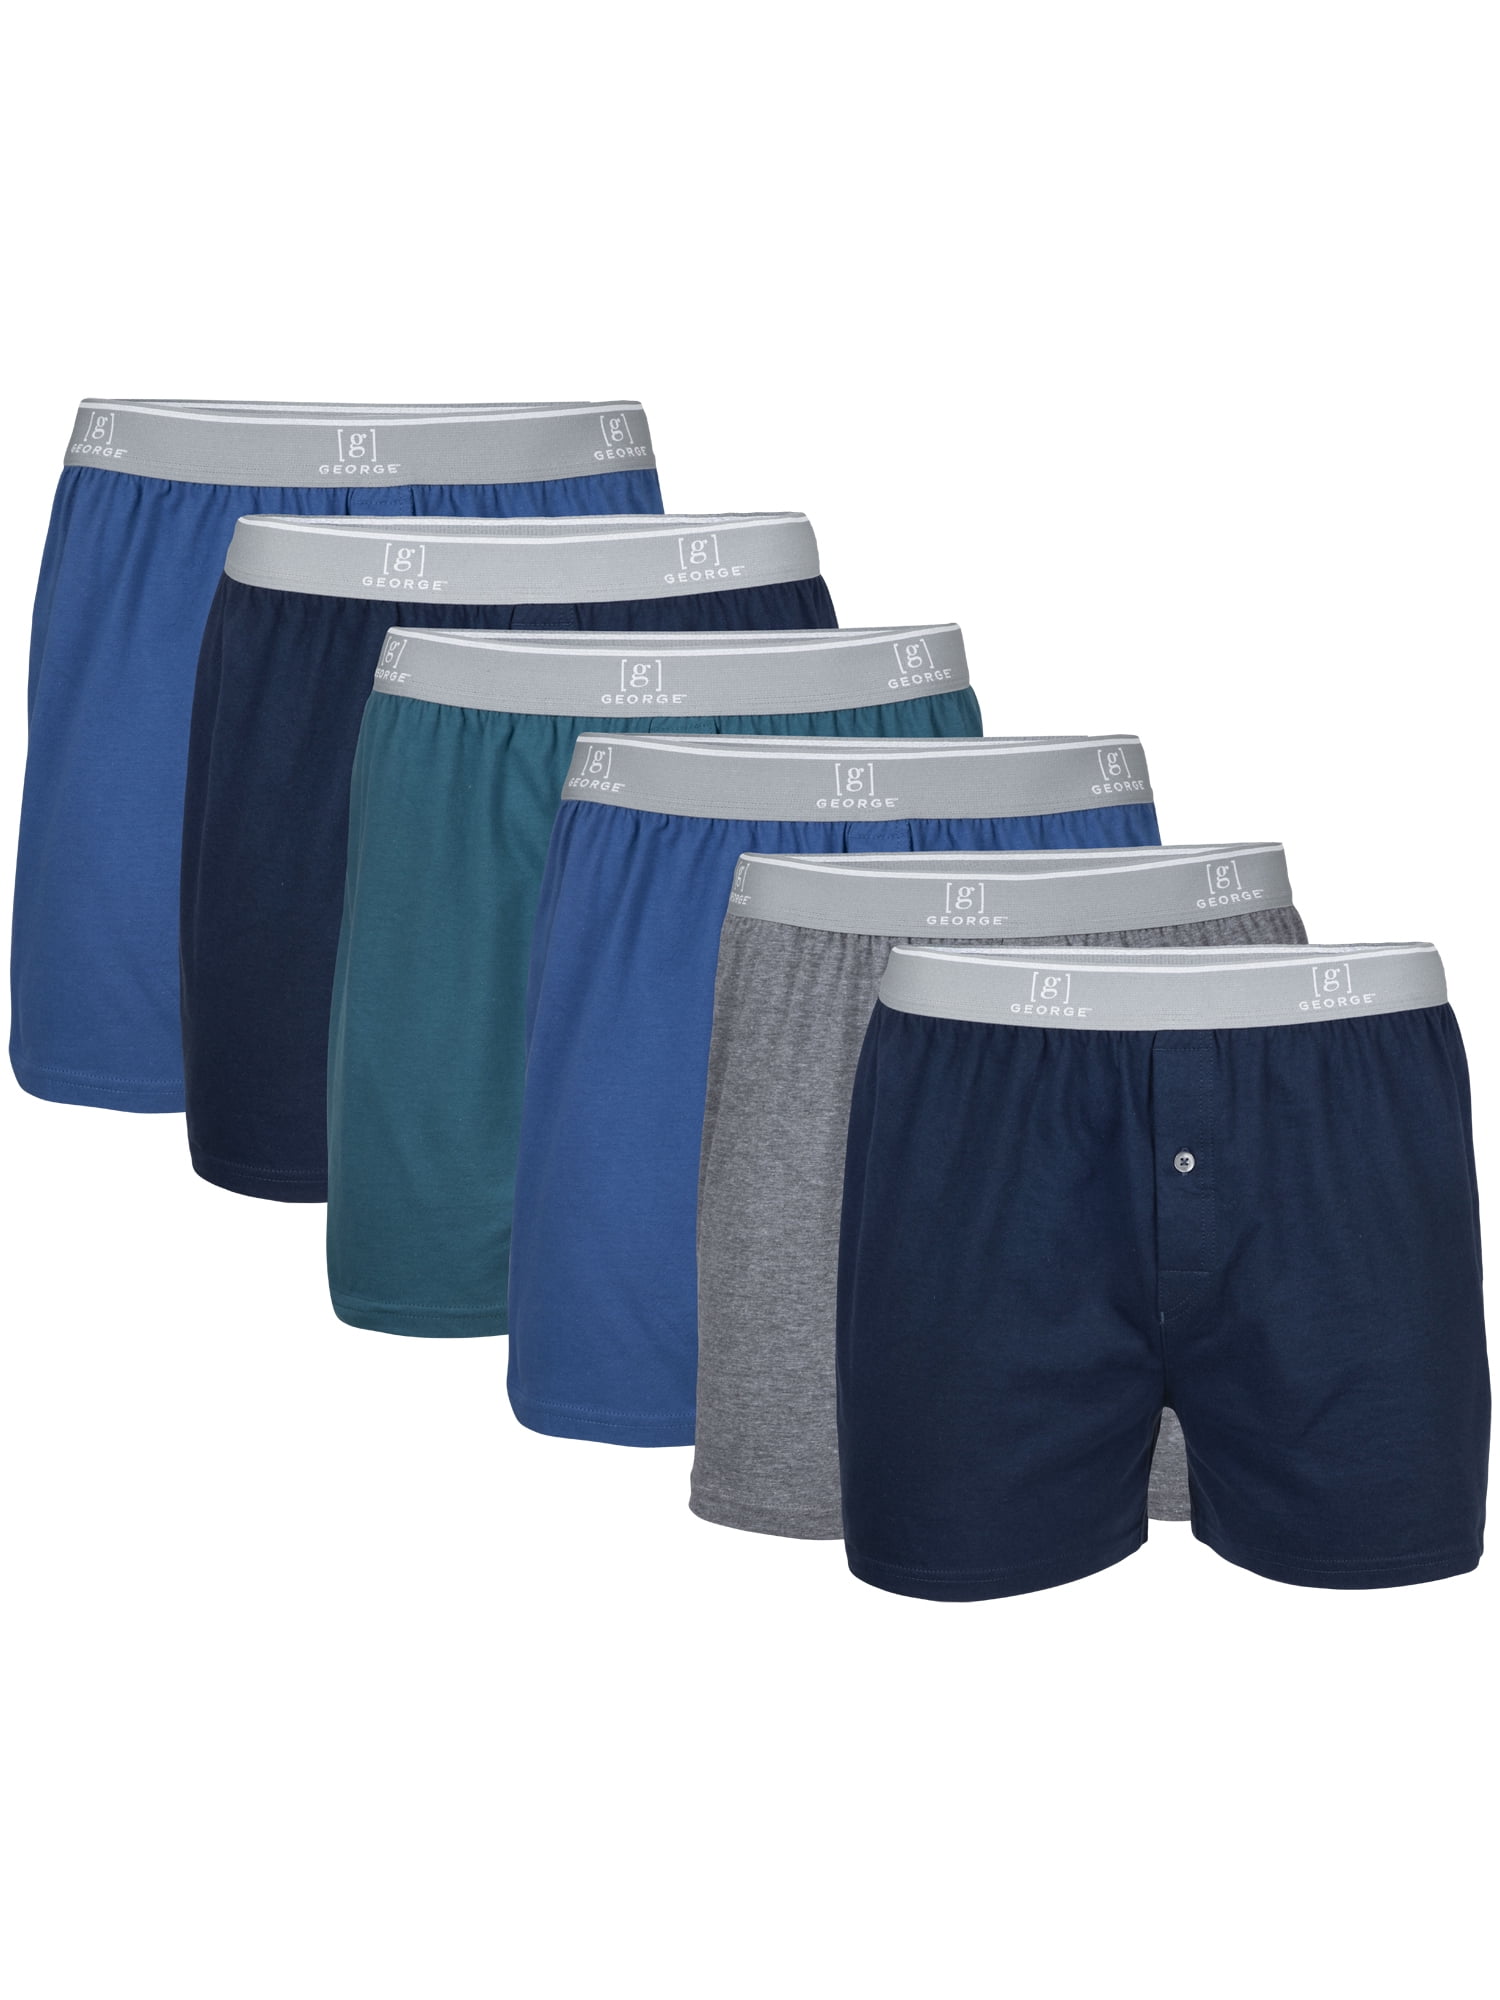 4 Pack ULTRA Mens Knit Boxer Shorts 100% Cotton Assorted Solid Color Underwear